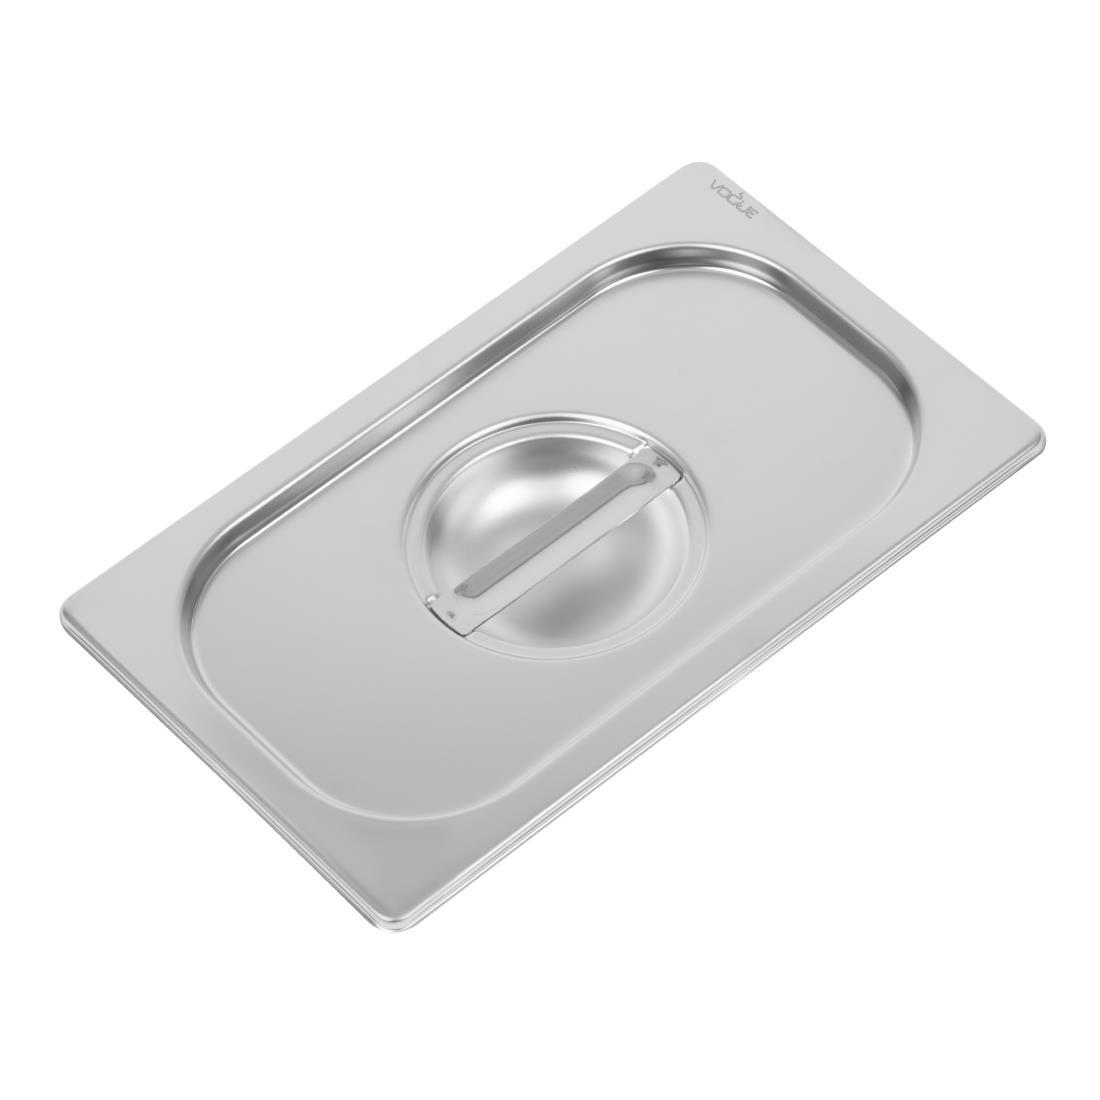 Vogue Heavy Duty Stainless Steel 1/4 Gastronorm Pan Lid - DW458  - 1